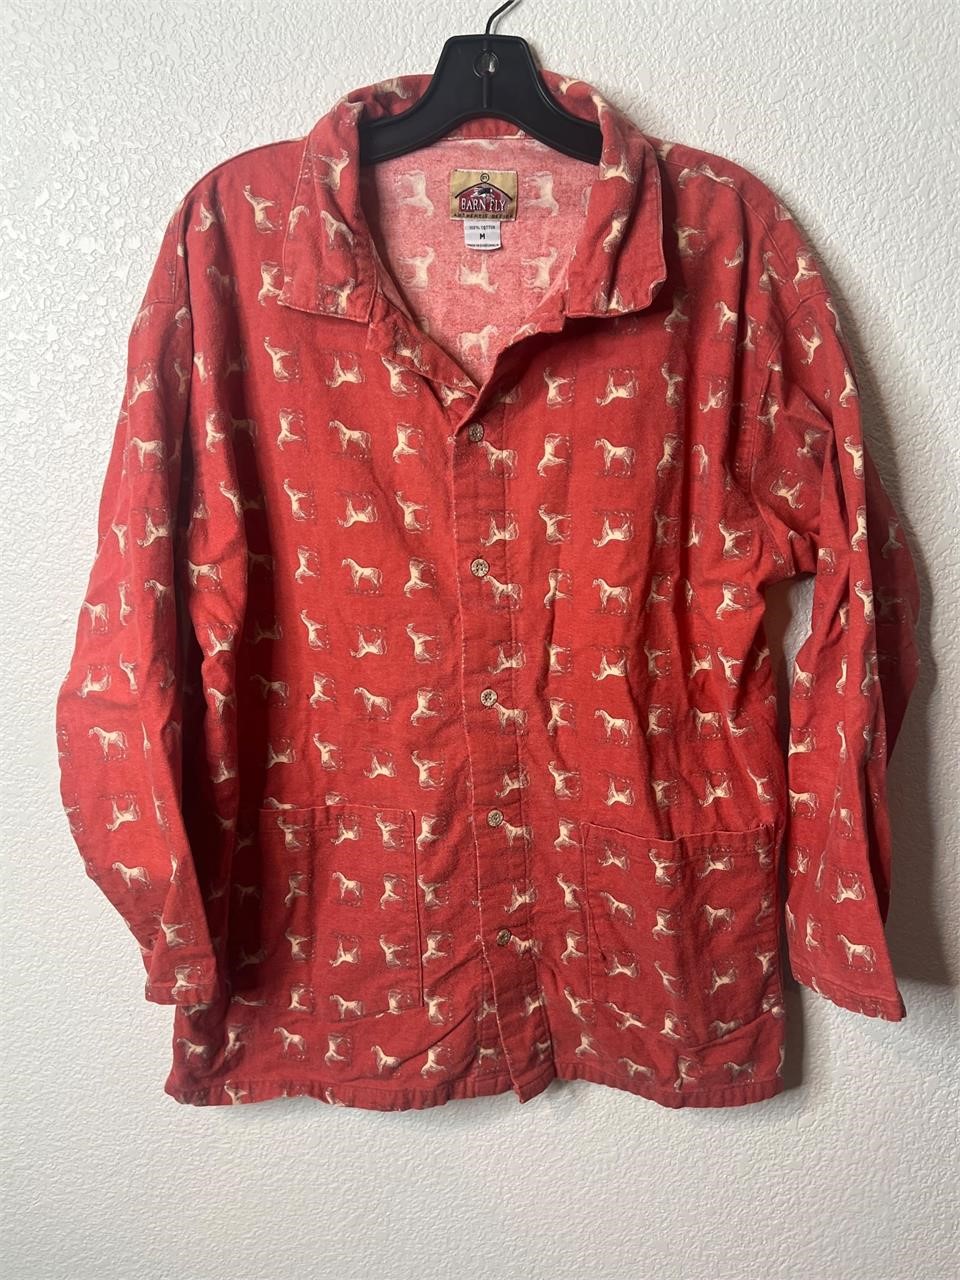 Vintage Barn Fly Horse All Over Print Pajamas